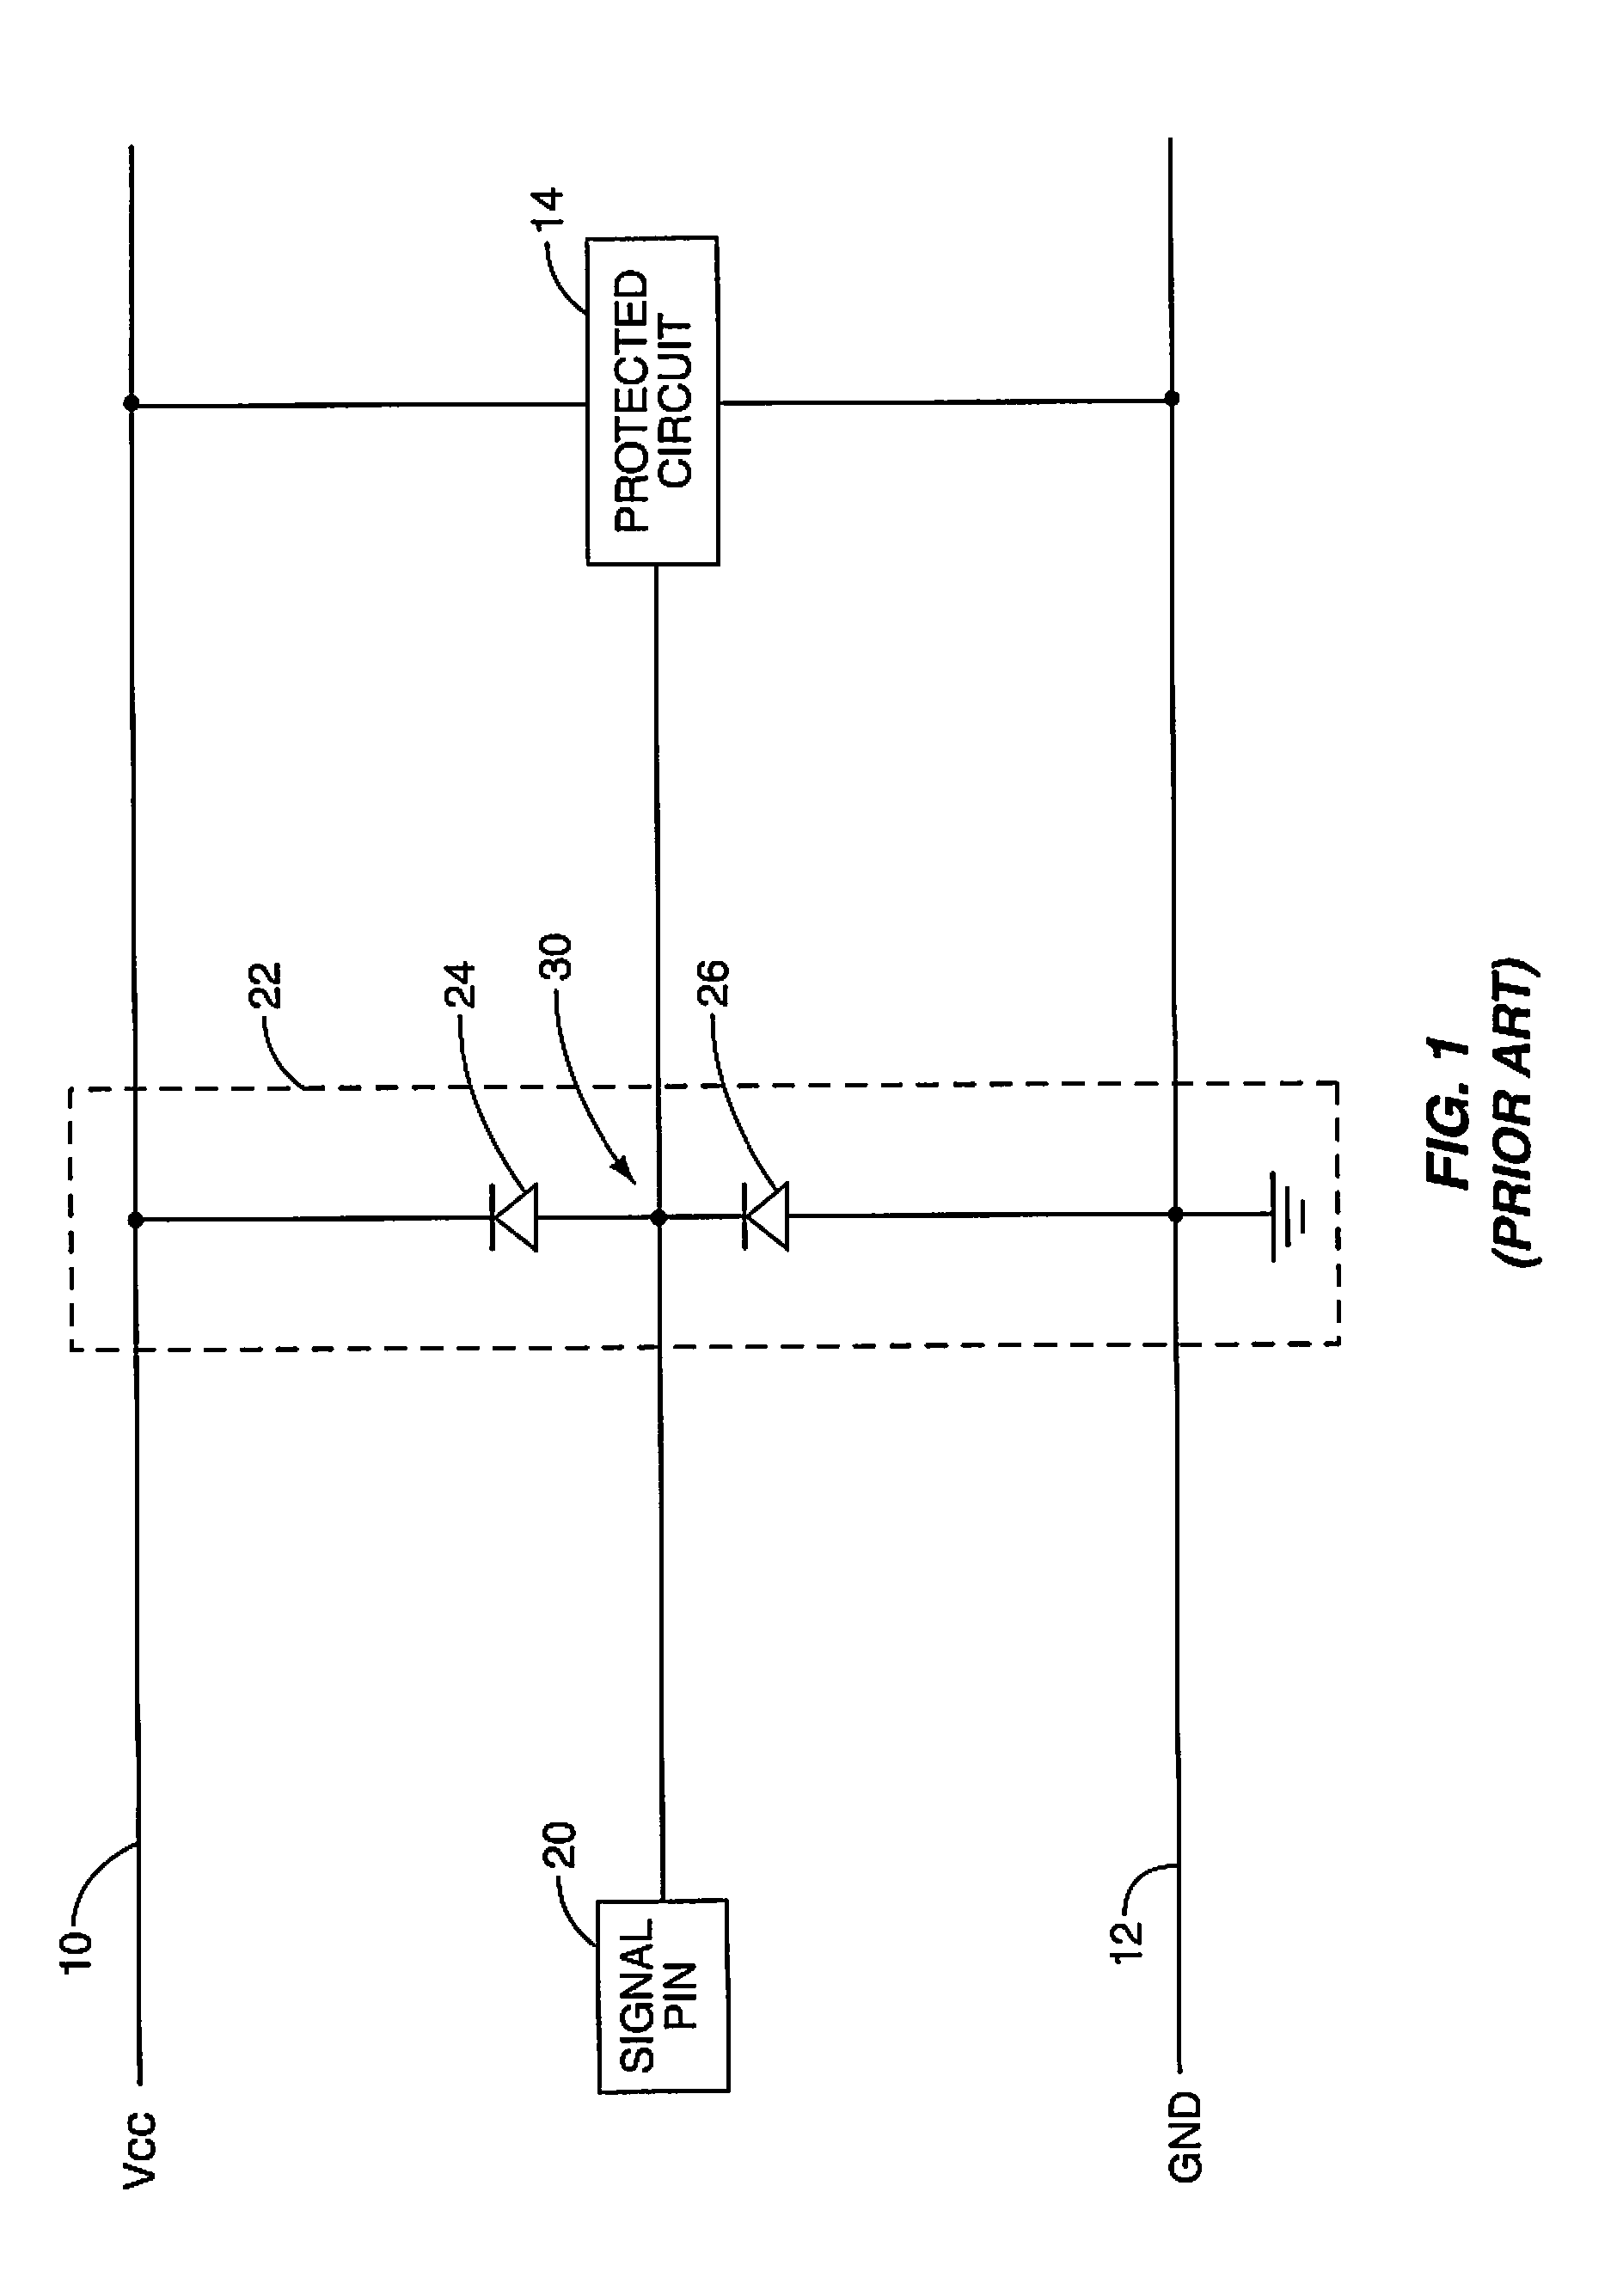 On-chip ESD protection circuit for radio frequency (RF) integrated circuits